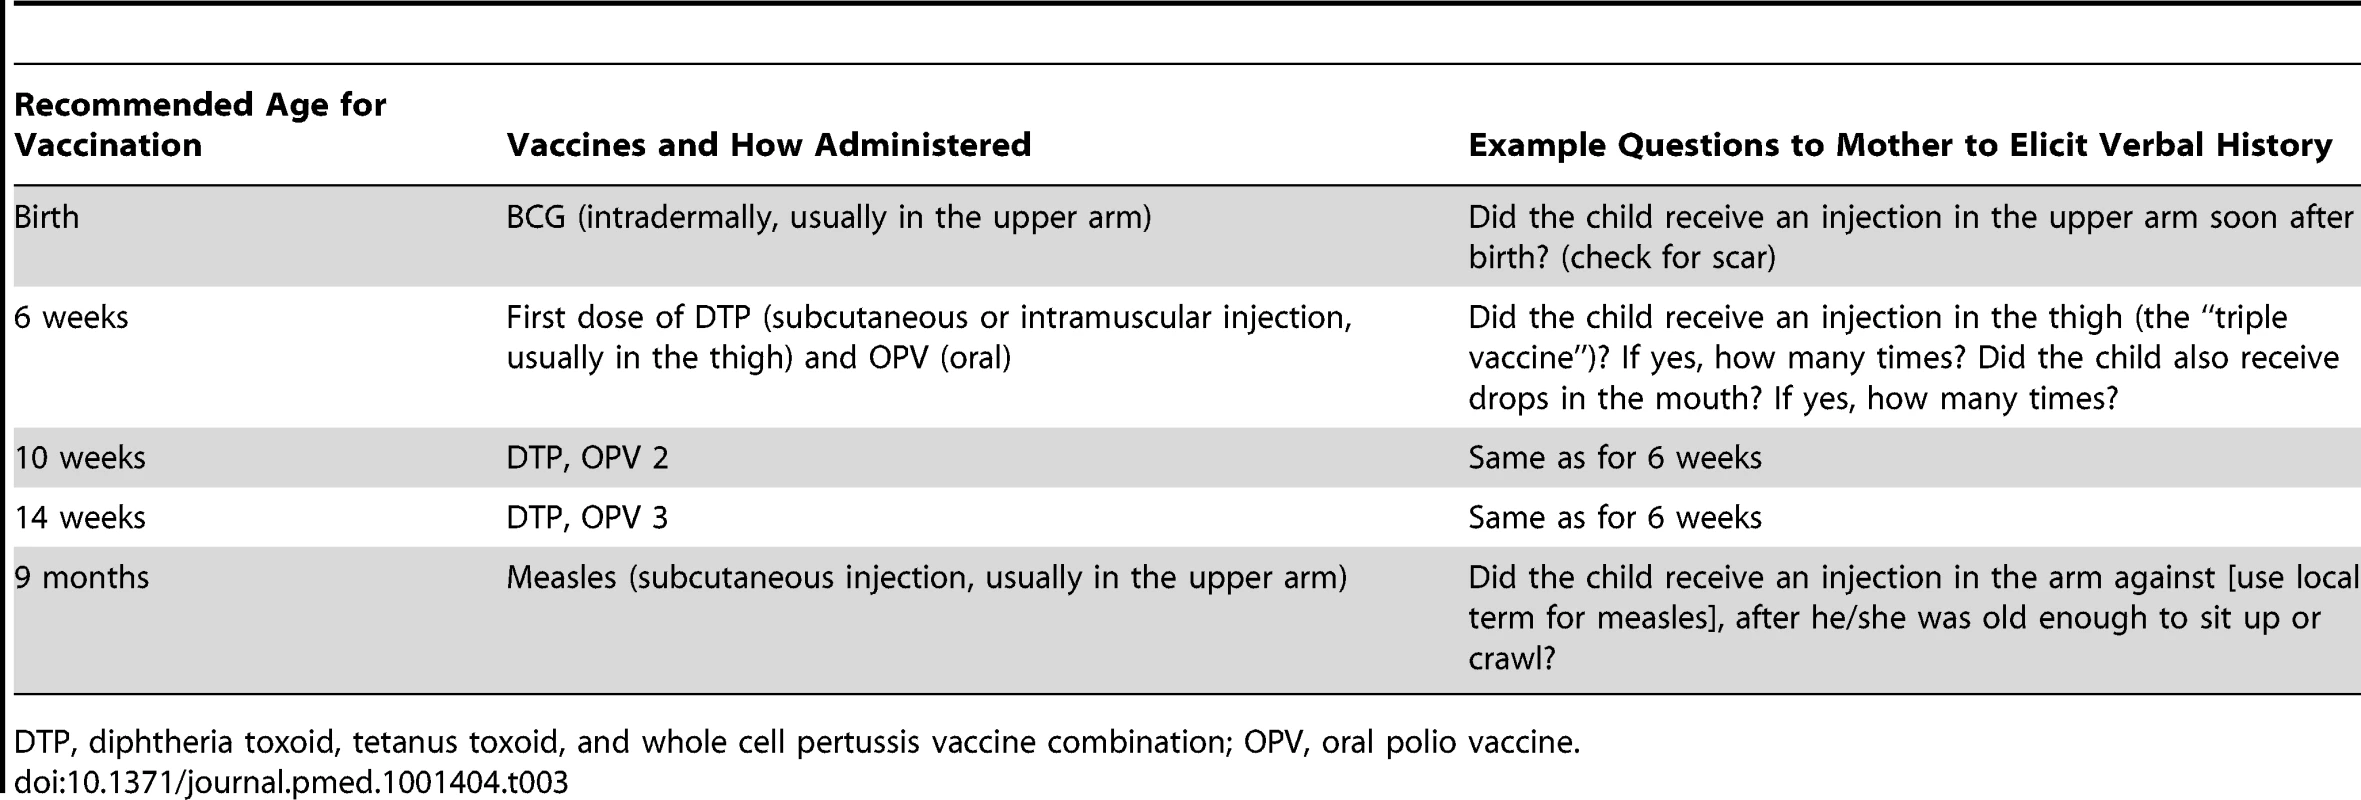 Illustrative questions used in the past to elicit a verbal history of vaccination according to the EPI schedule in the 1980s.